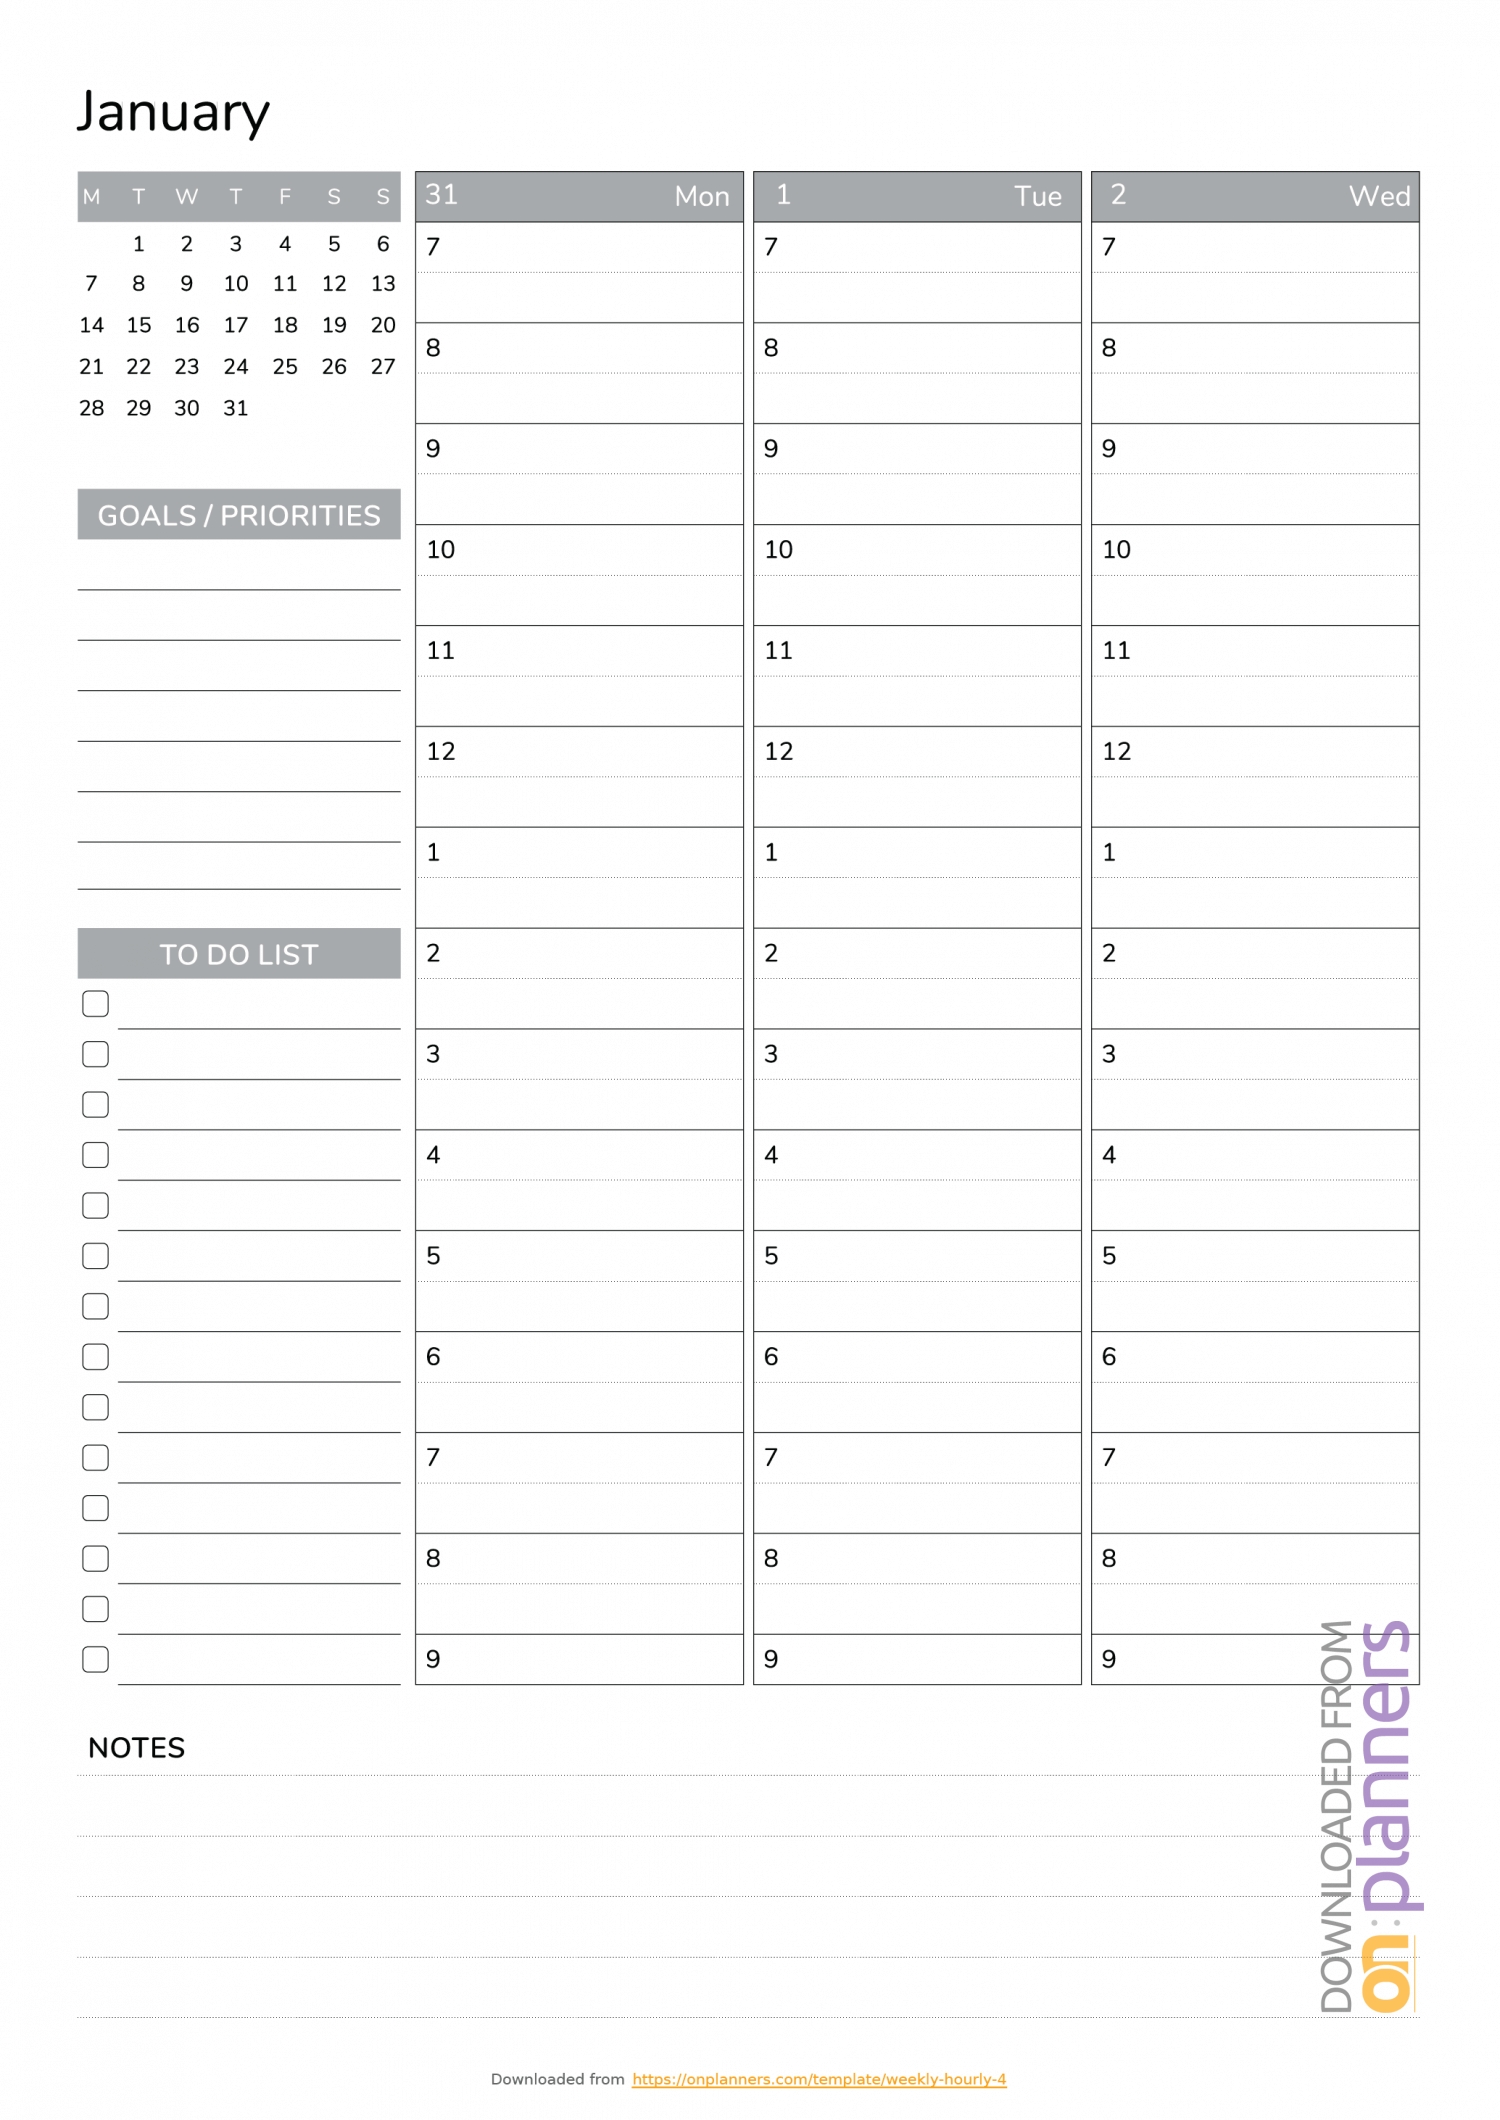 The Best Weekly Schedule Templates. Organize Your Time